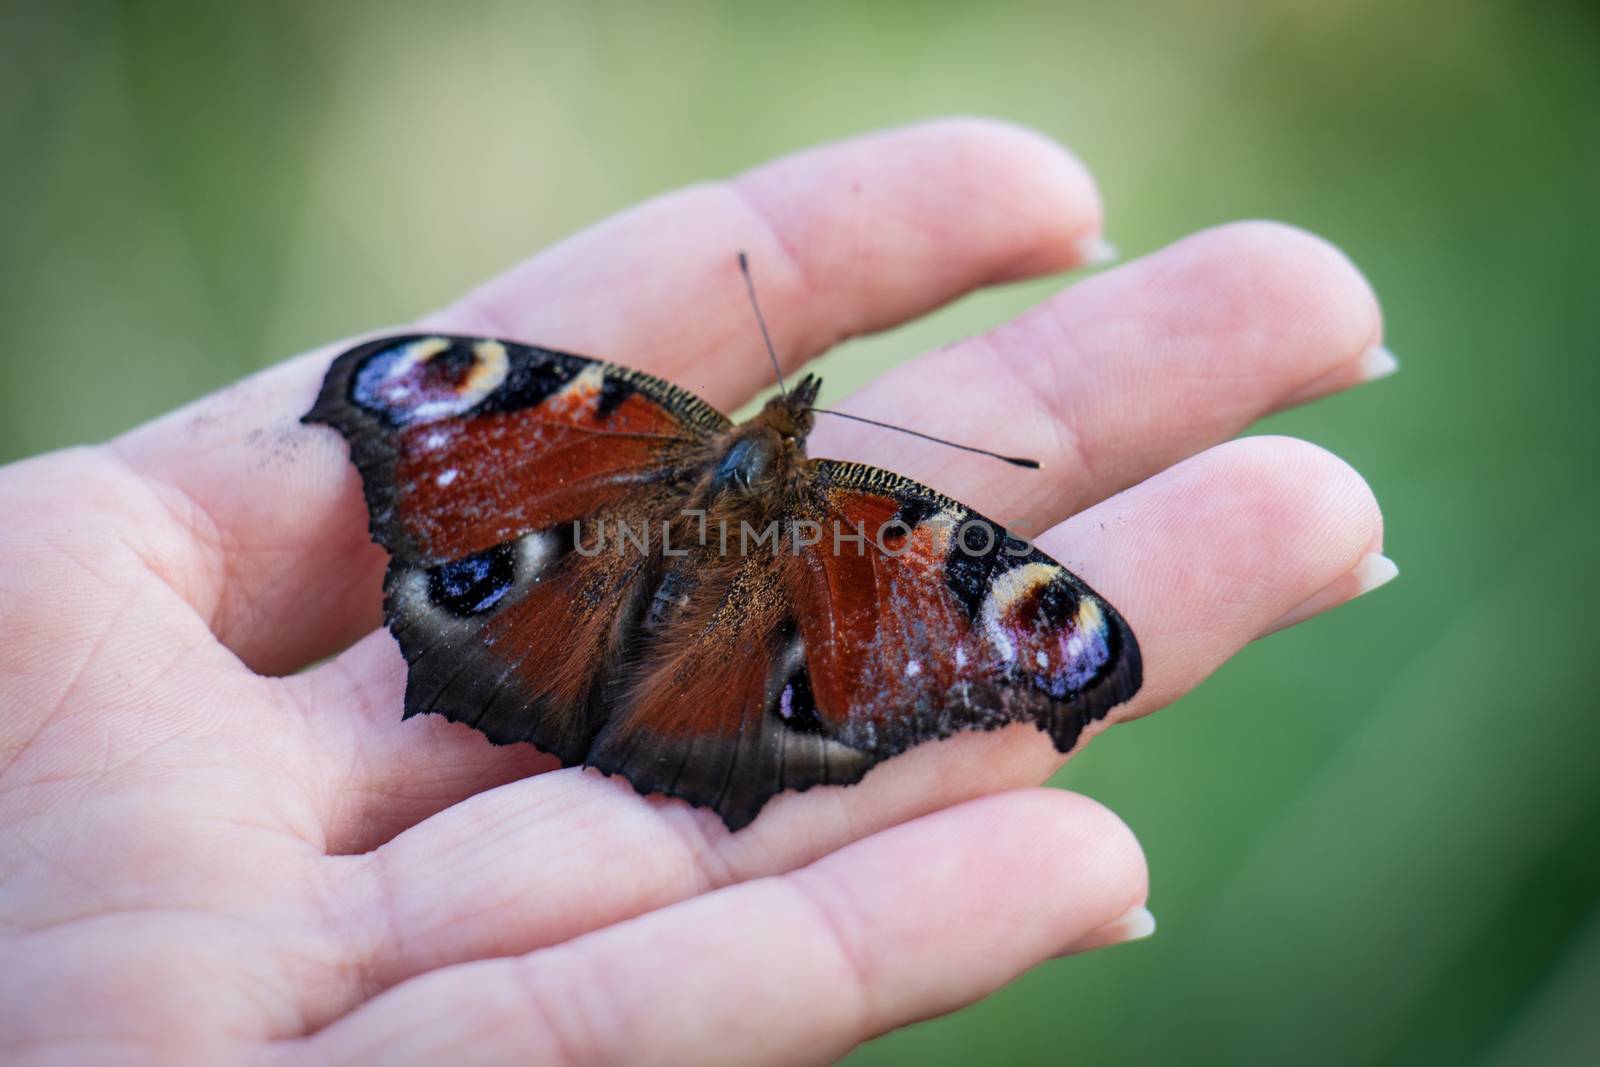 Butterfly on a man's hand. Hand on grass background. Summer seas by wytrazek